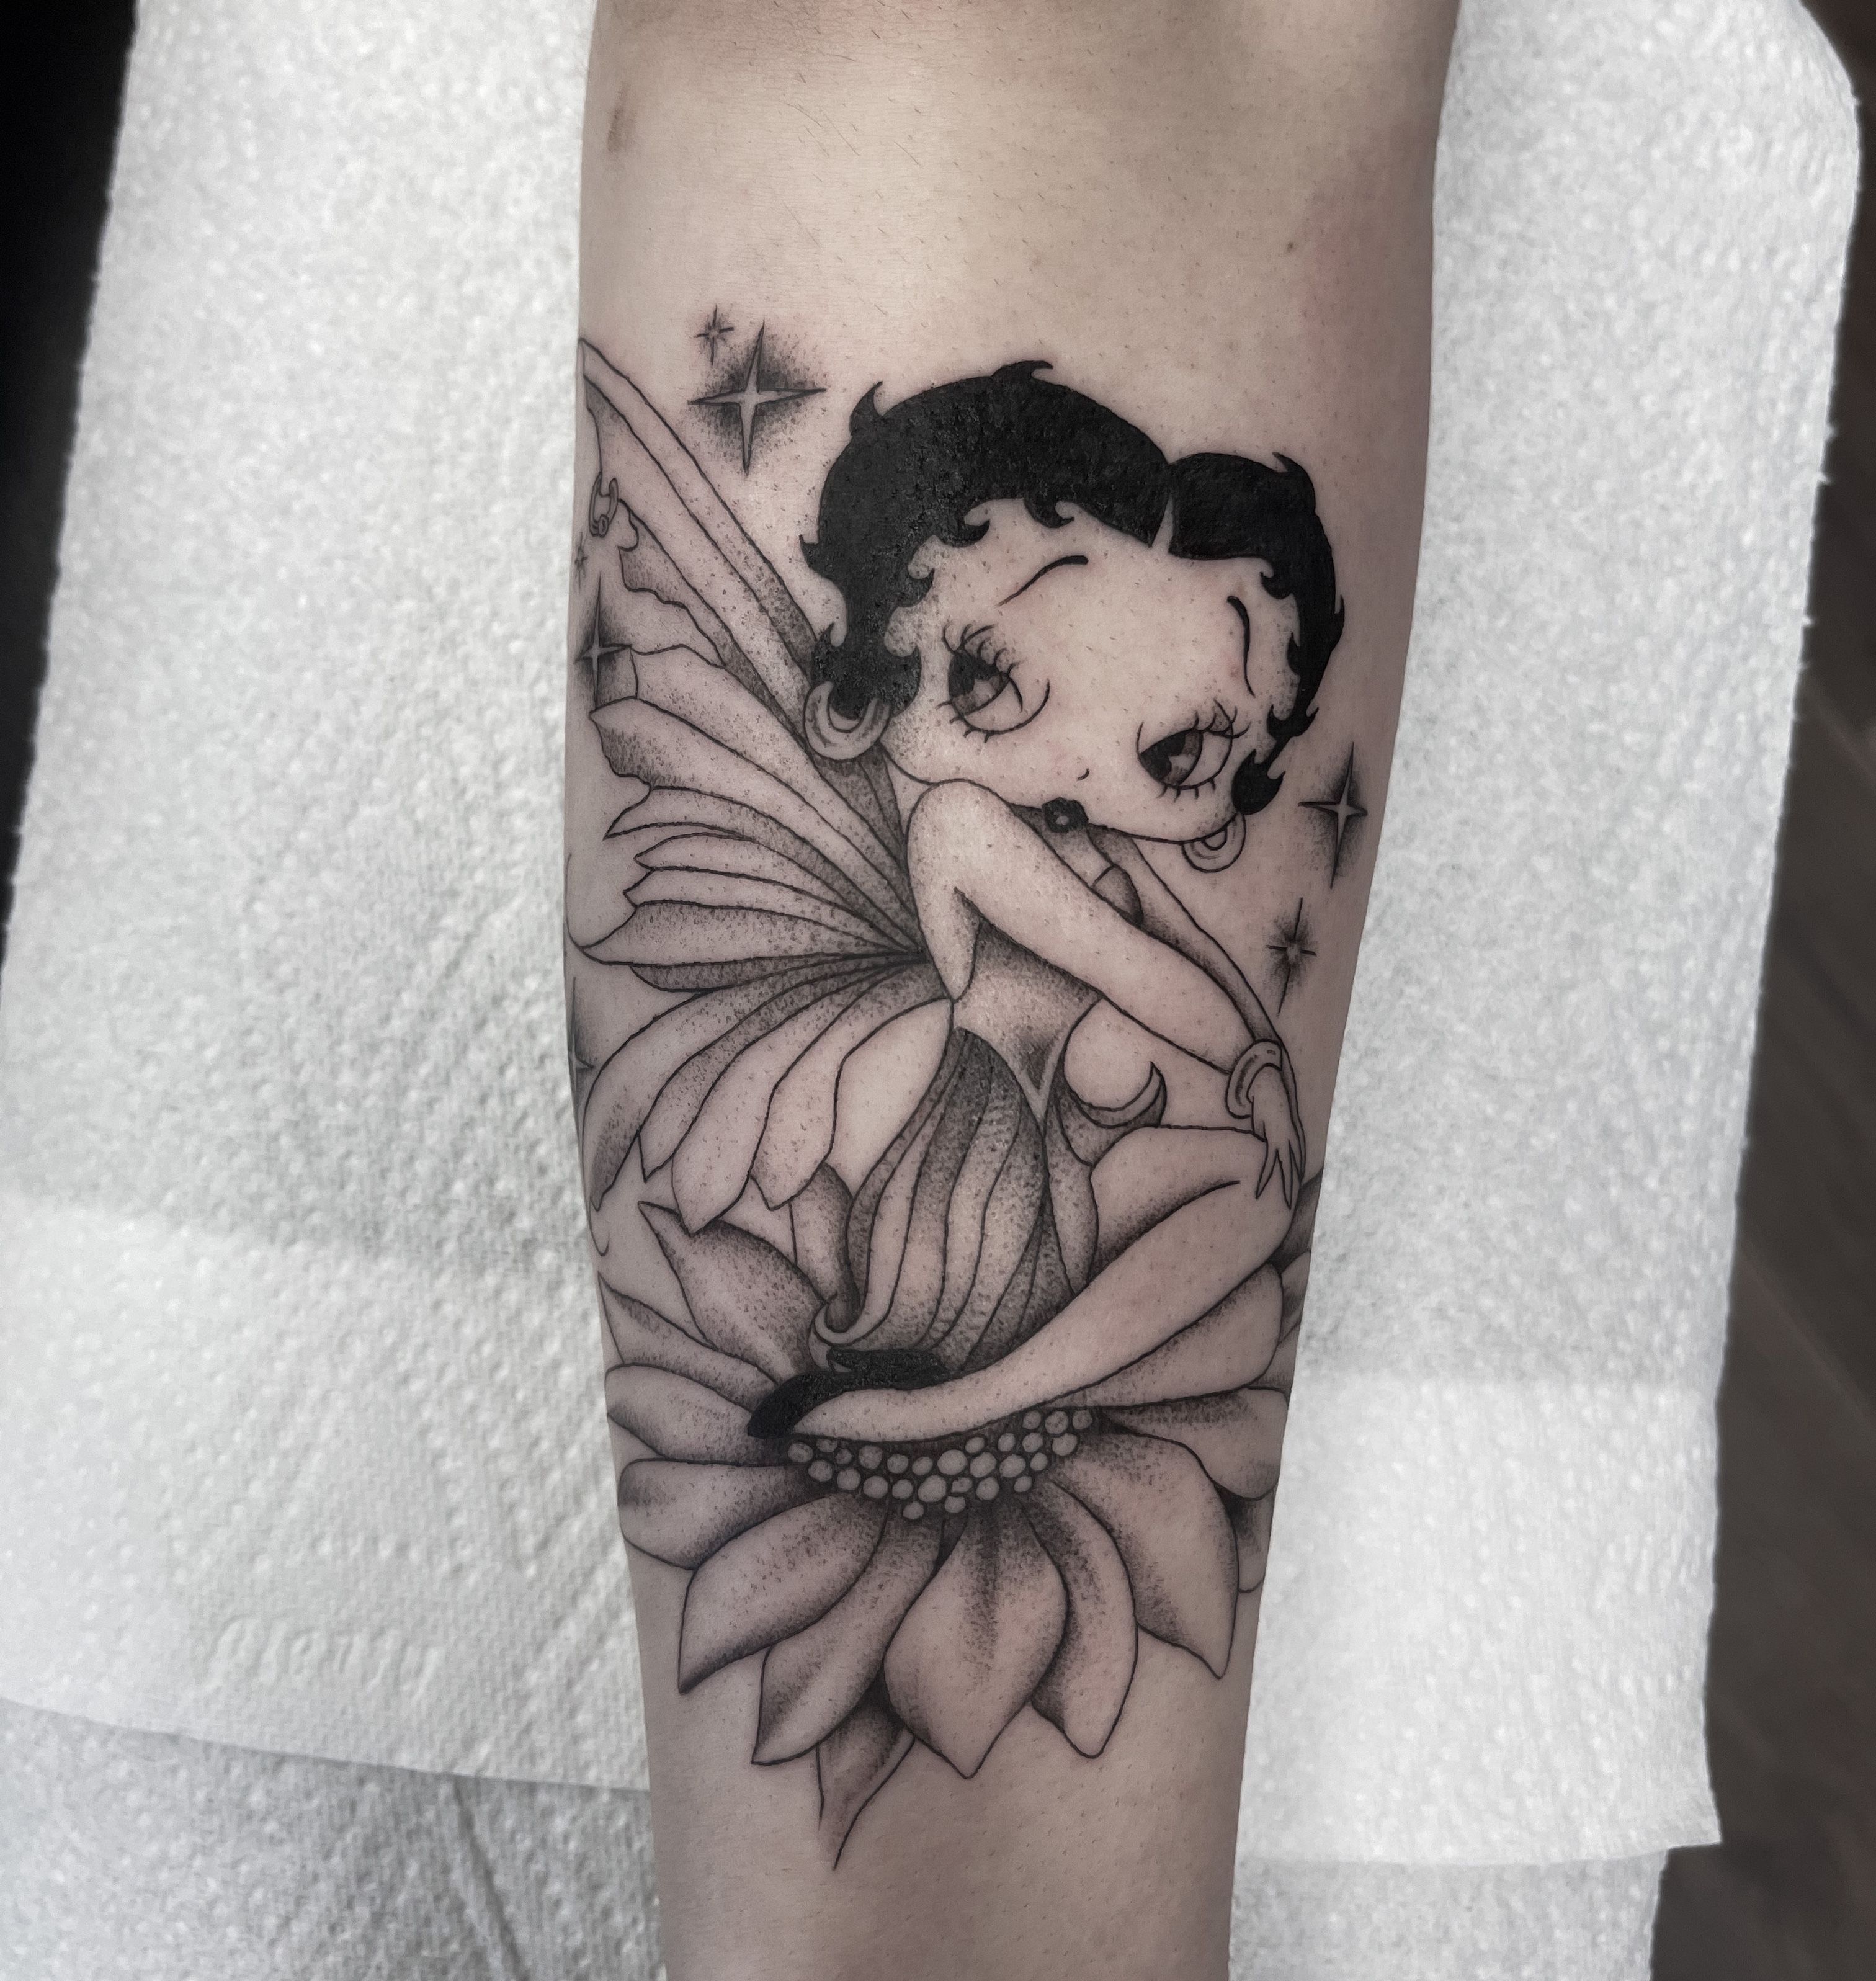 jeremylynkimzey killed this classic Betty boop tattoo. For booking call the  shop or send us a direct message and ask for Jeremy. | Instagram